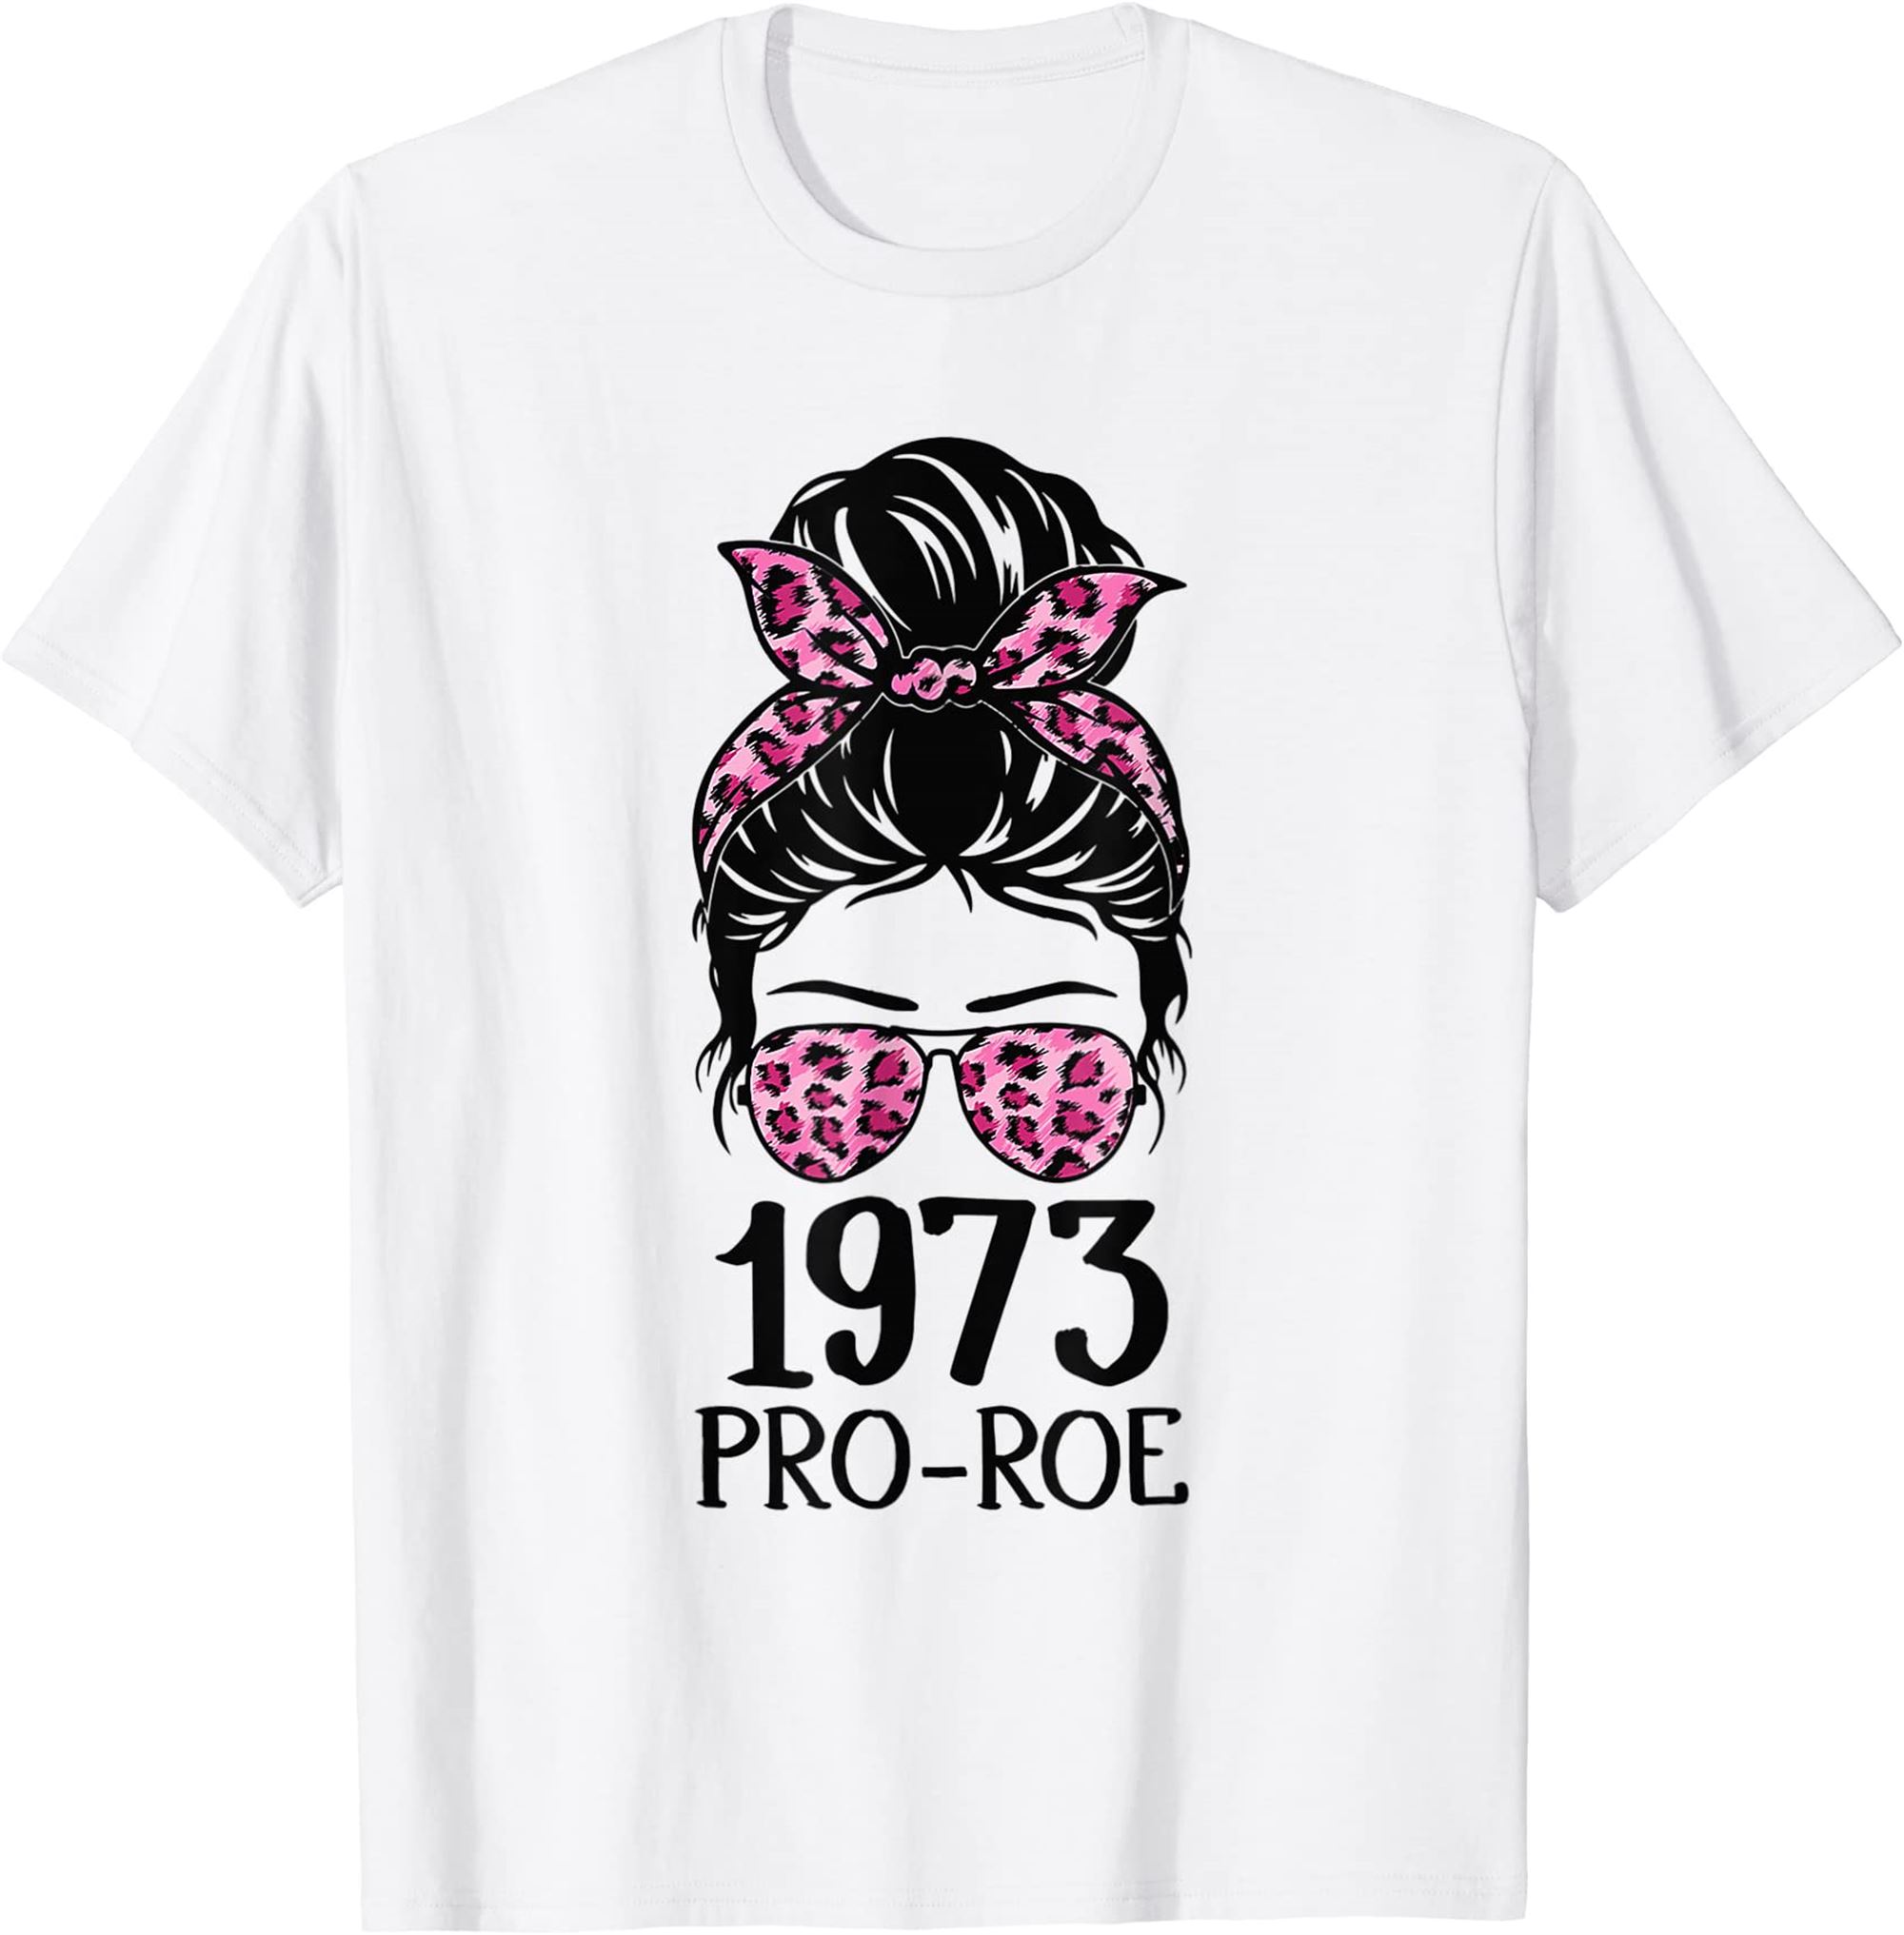 Pro 1973 Roe Pro Choice 1973 Womens Rights Feminism T-shirt Plus Size Up To 5xl